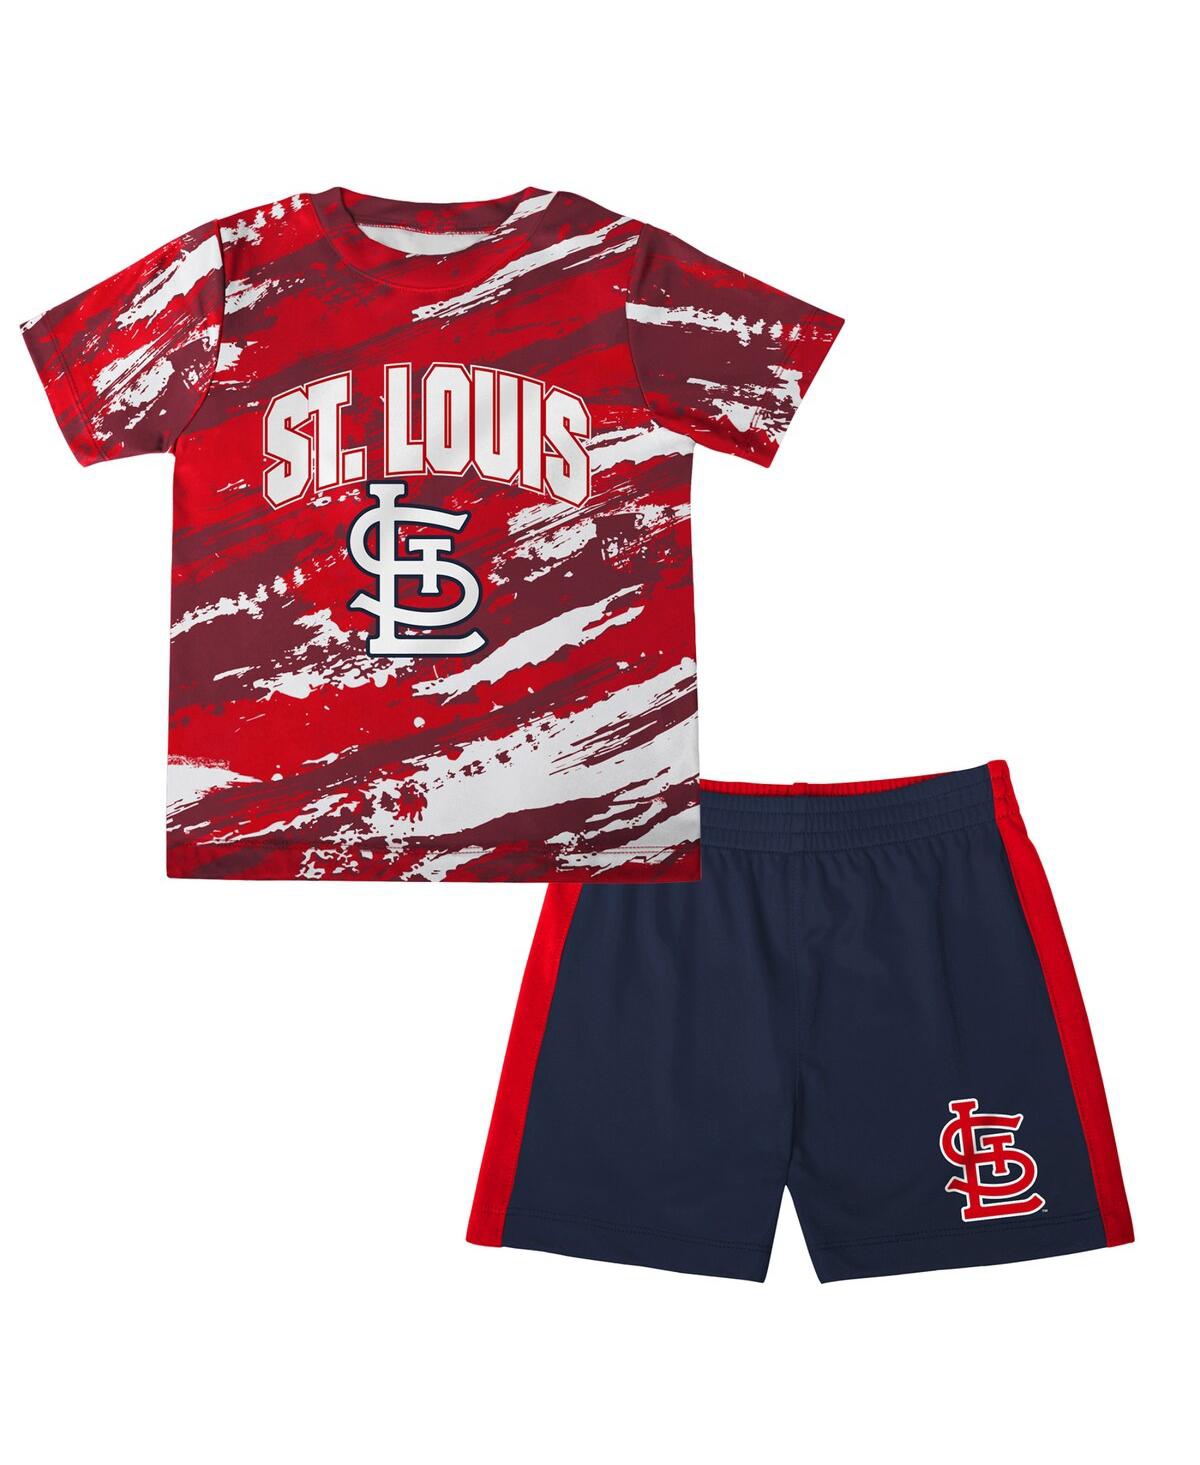 Outerstuff Babies' Infant Boys And Girls Red And Navy St. Louis Cardinals Stealing Homebase 2.0 T-shirt And Shorts Set In Red,navy